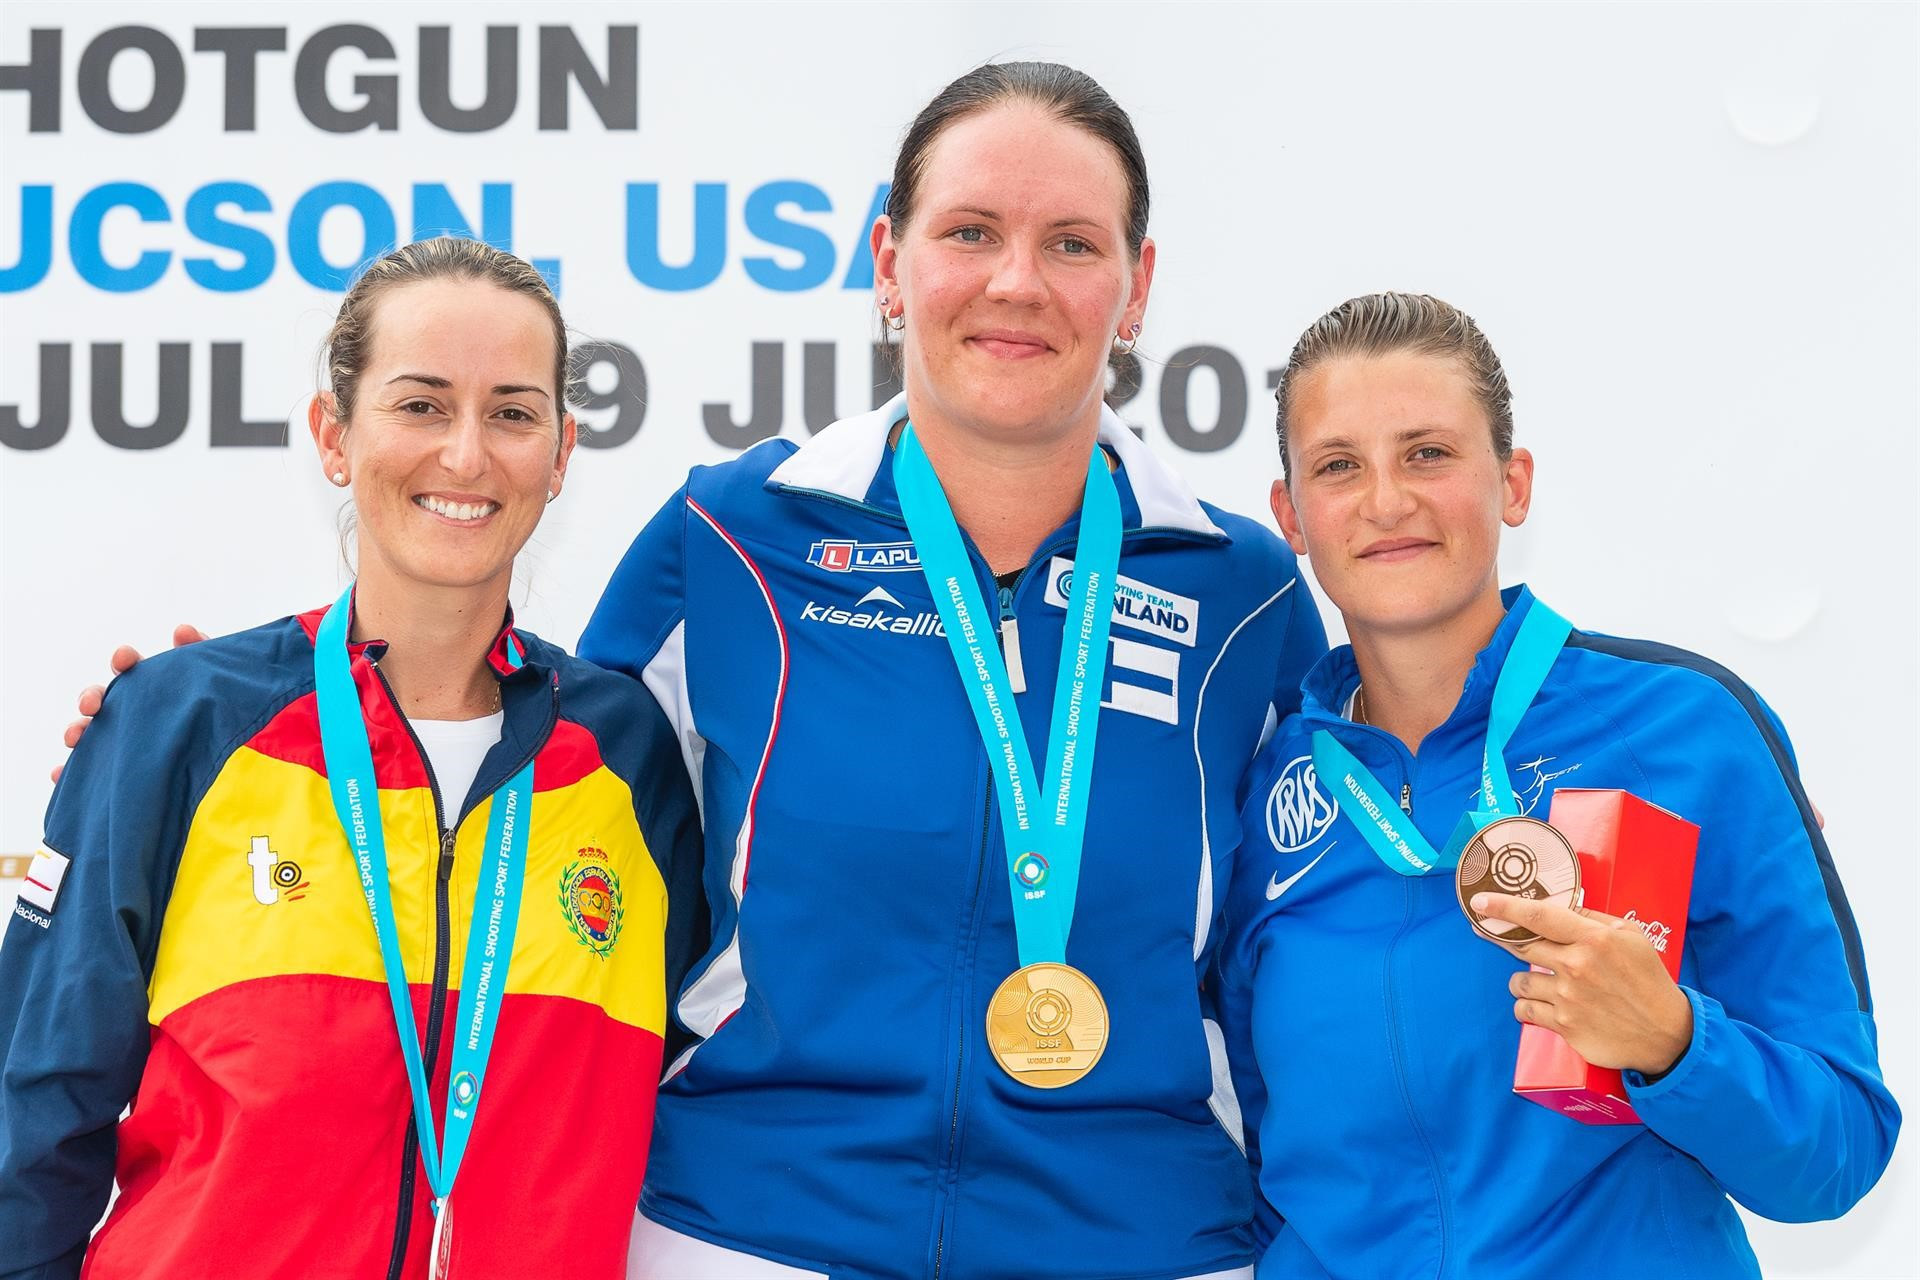 Finland's Marika Salmi emerged victorious from the shoot-off to take gold for the first time in her career ©ISSF